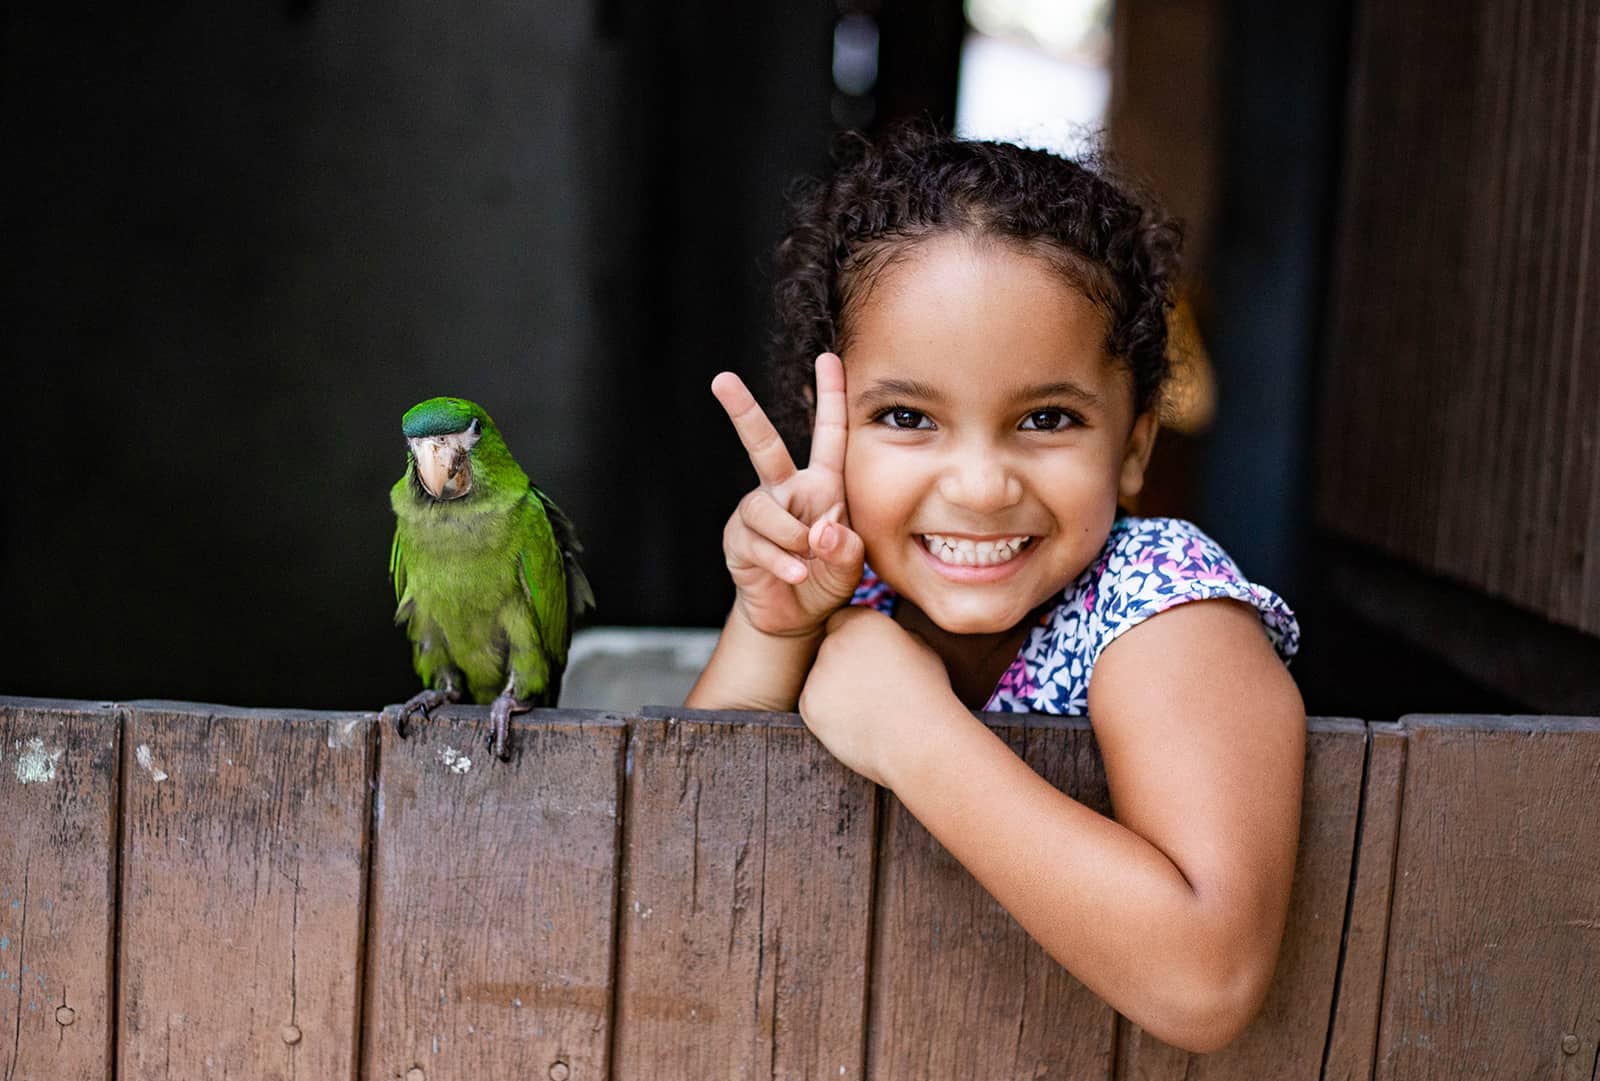 Maisa is at the back door to her house posing with her aunt's green parrot, Tico.